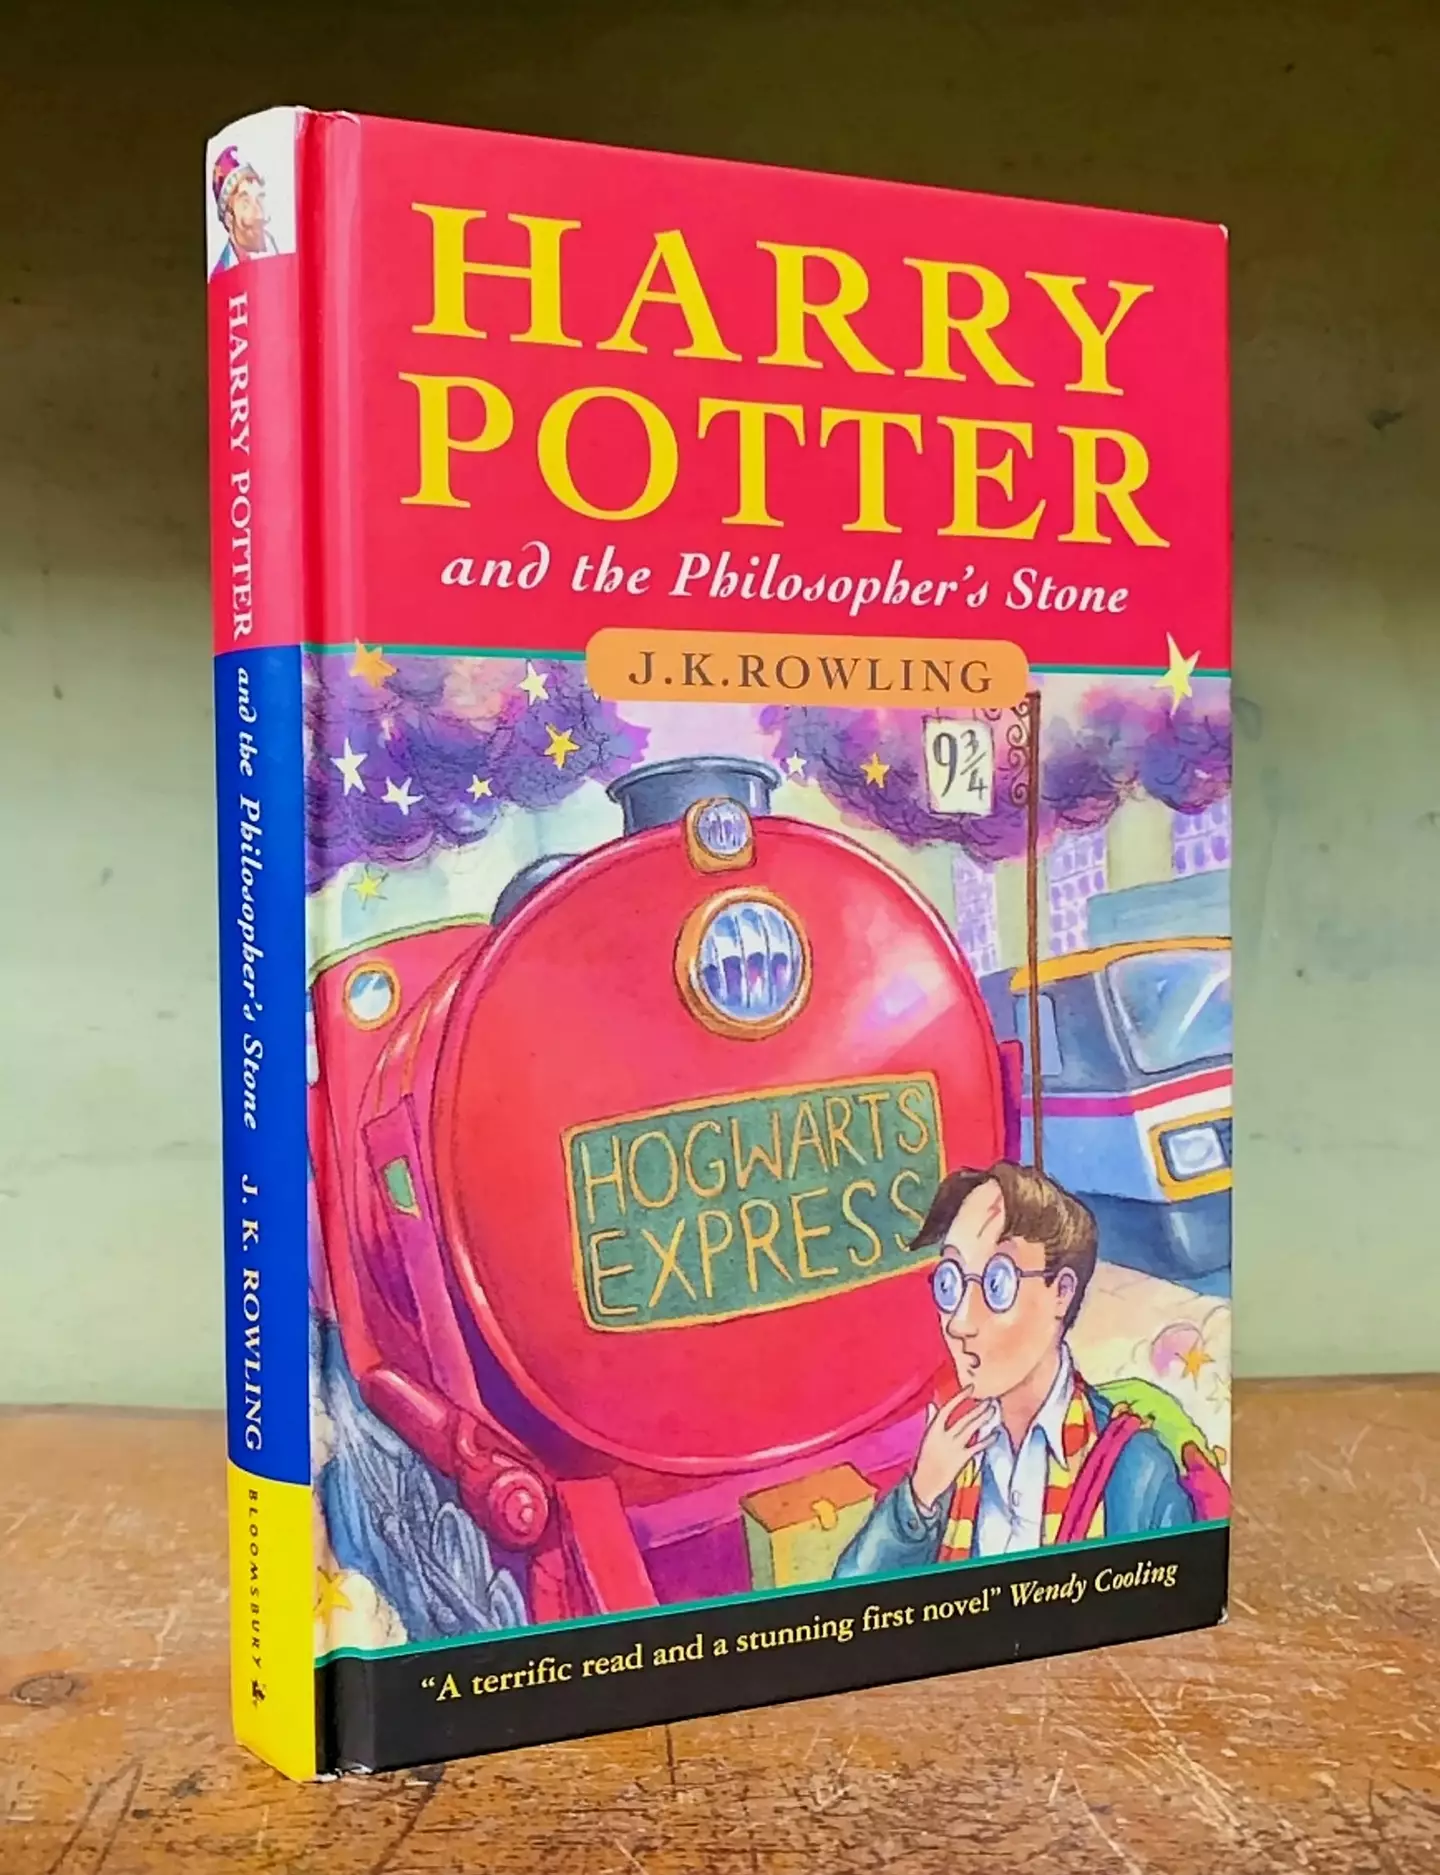 In December 2021 a near pristine hardback first edition of Philosopher’s Stone sold for $471,000 (£349,186) (